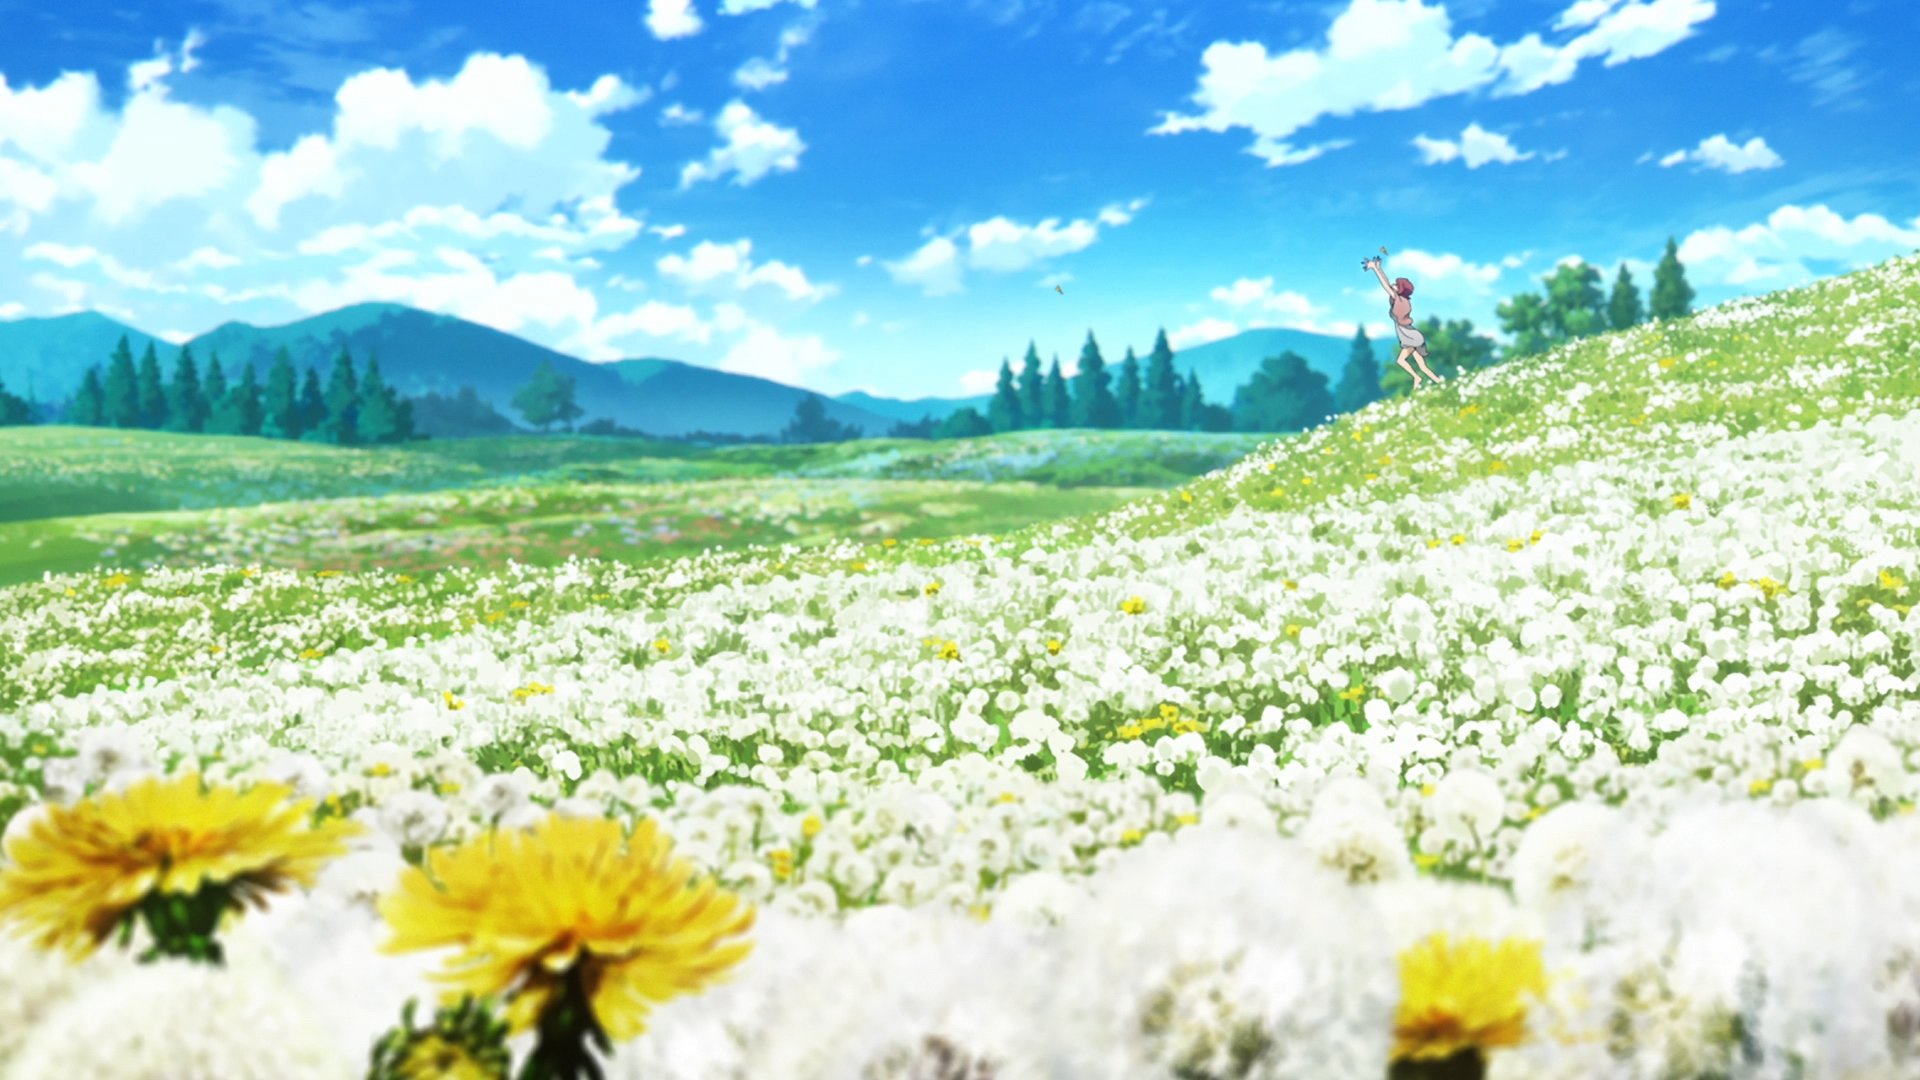 SAO: Flower Bed - Other & Anime Background Wallpapers on Desktop Nexus  (Image 1874549)